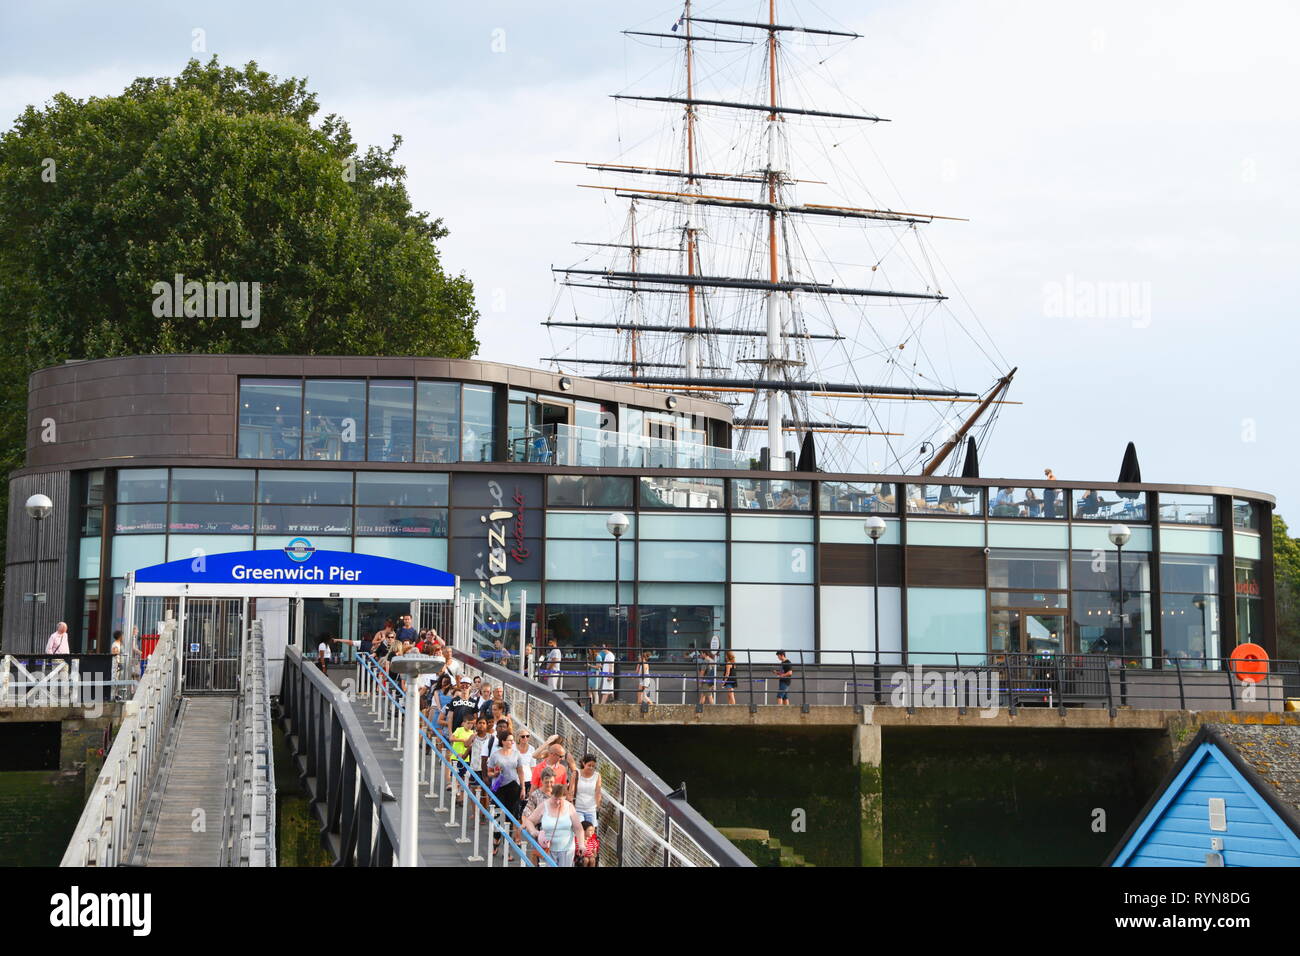 Passengers walk over a bridge to a boat on the River Thames, at Greenwich Pier in London, United Kingdom. Stock Photo